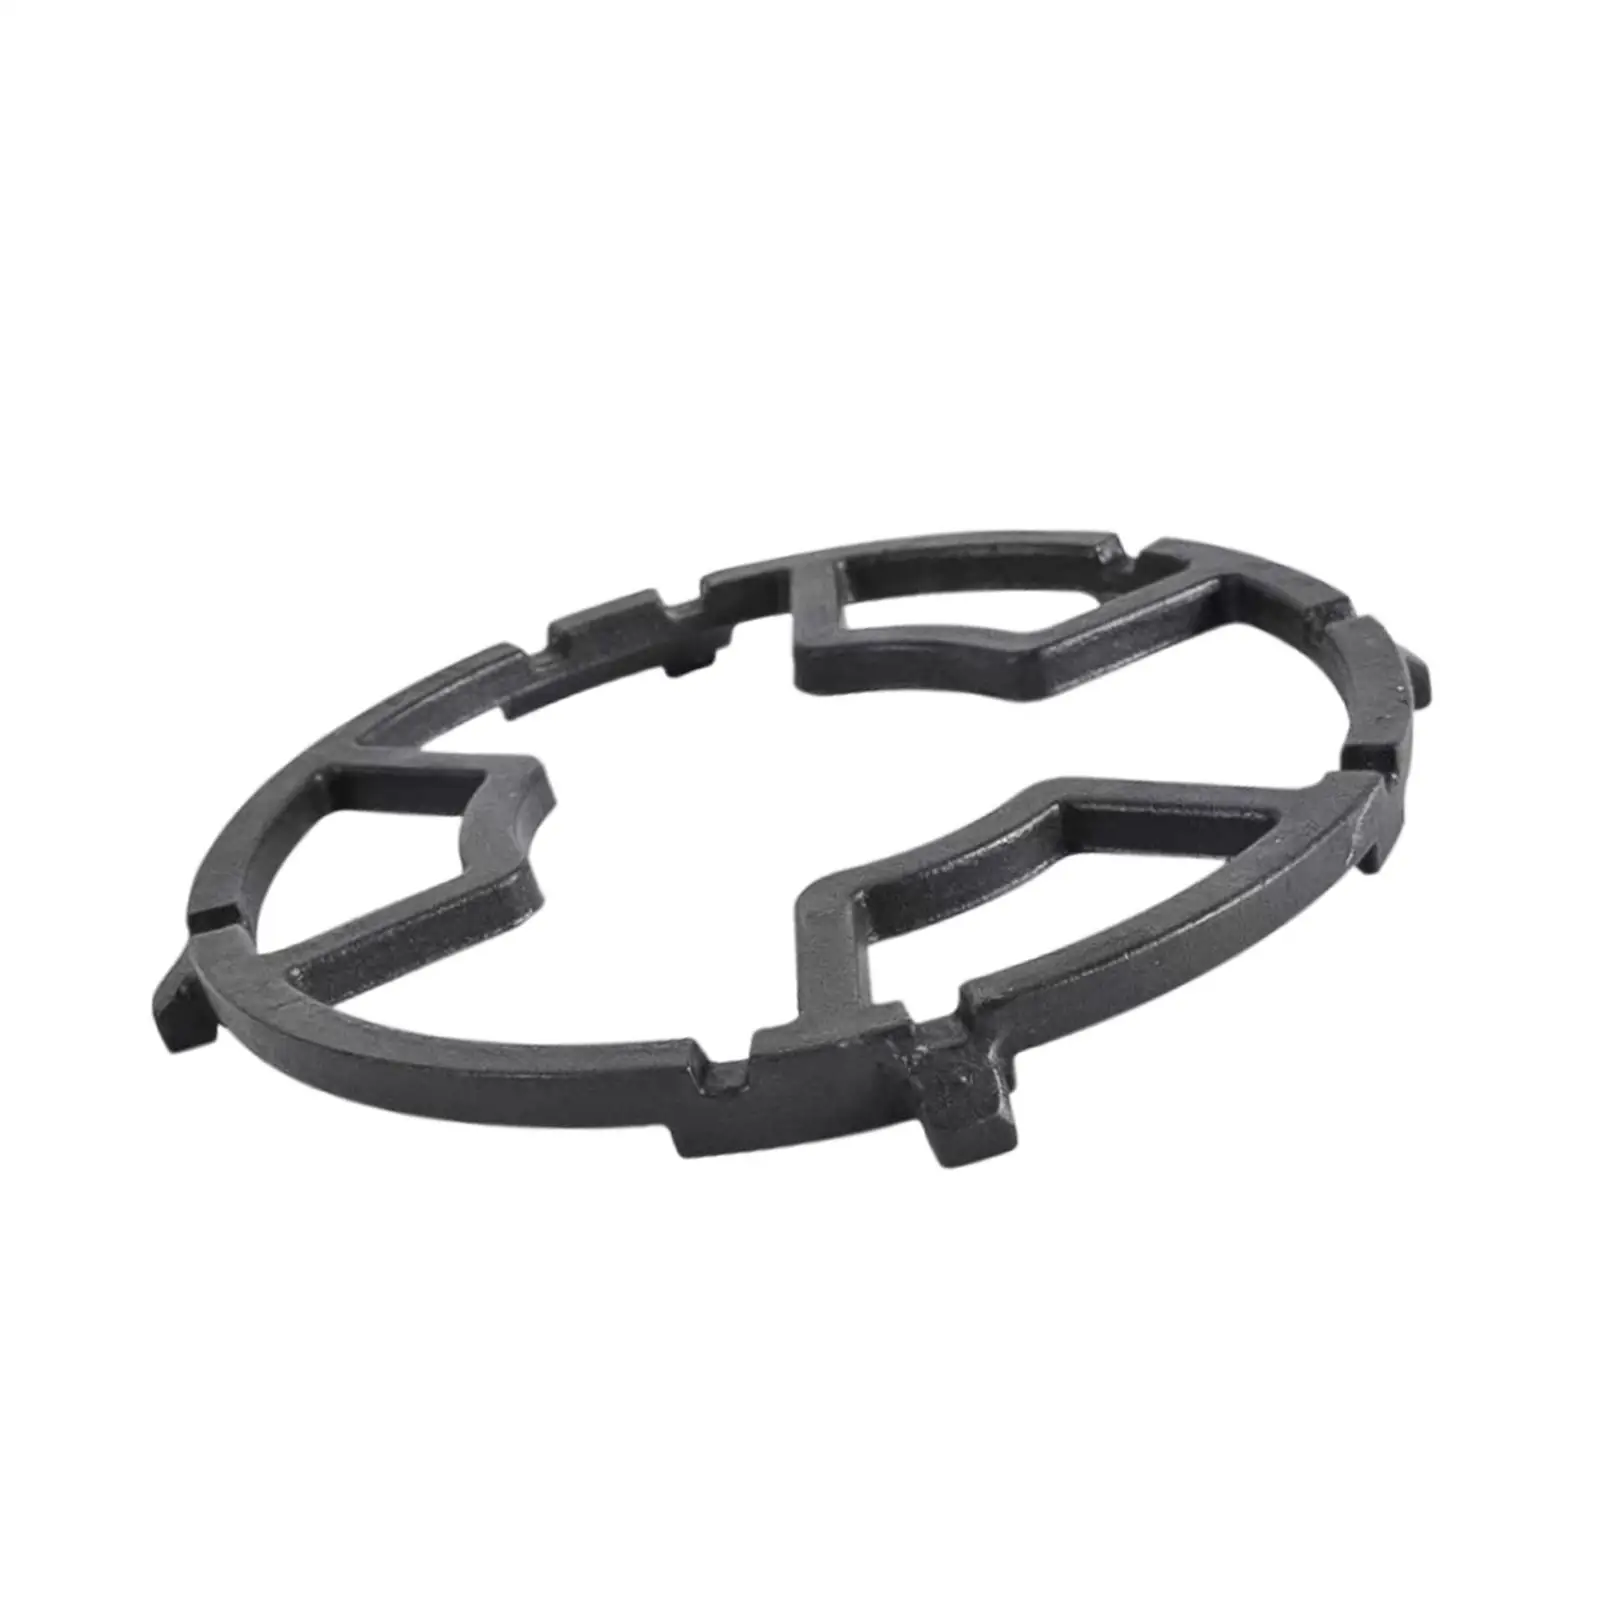 Cast Iron Wok Support rings Wok Rack Rings Wok Stand Gas Rings Reducer Trivets for Pot Kitchen Sauce Pans Restaurant Camping